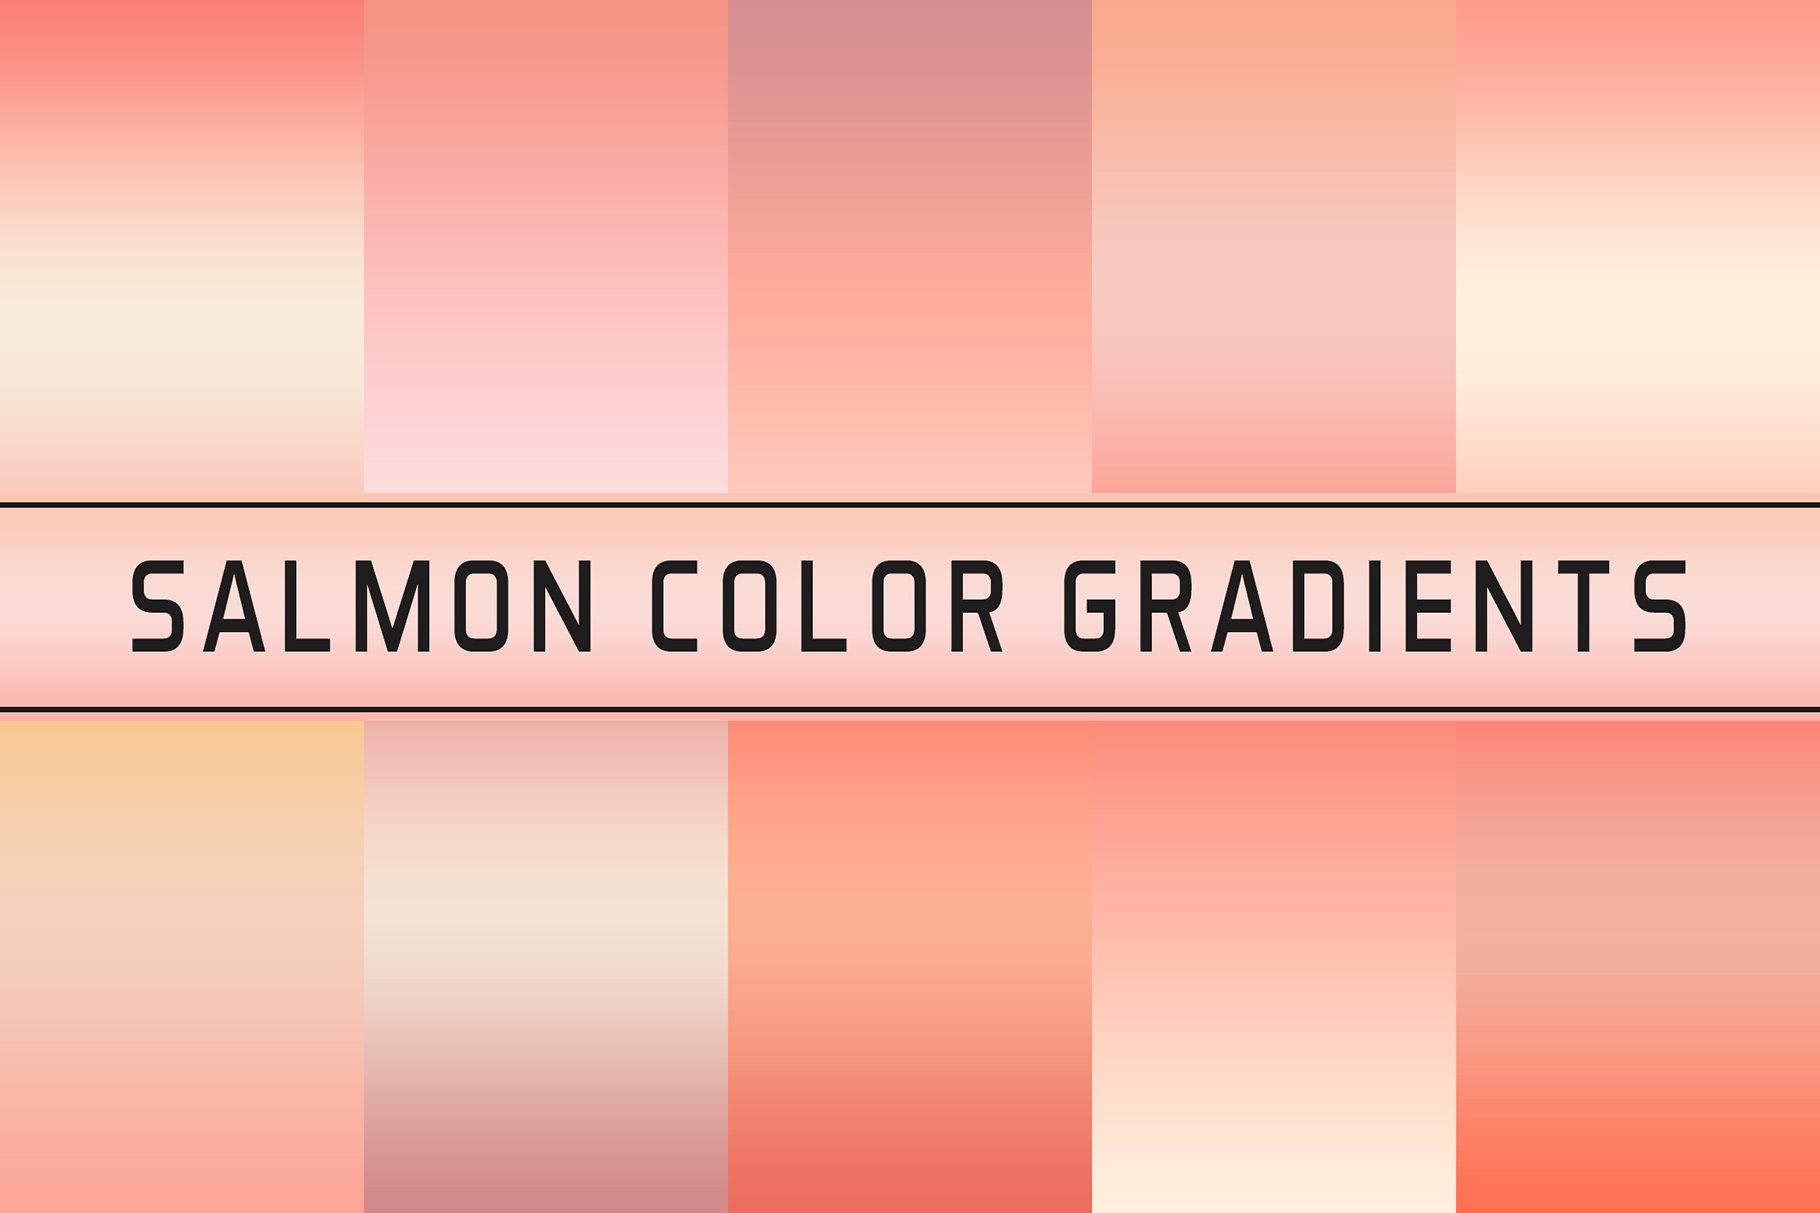 Salmon Color Gradients cover image.